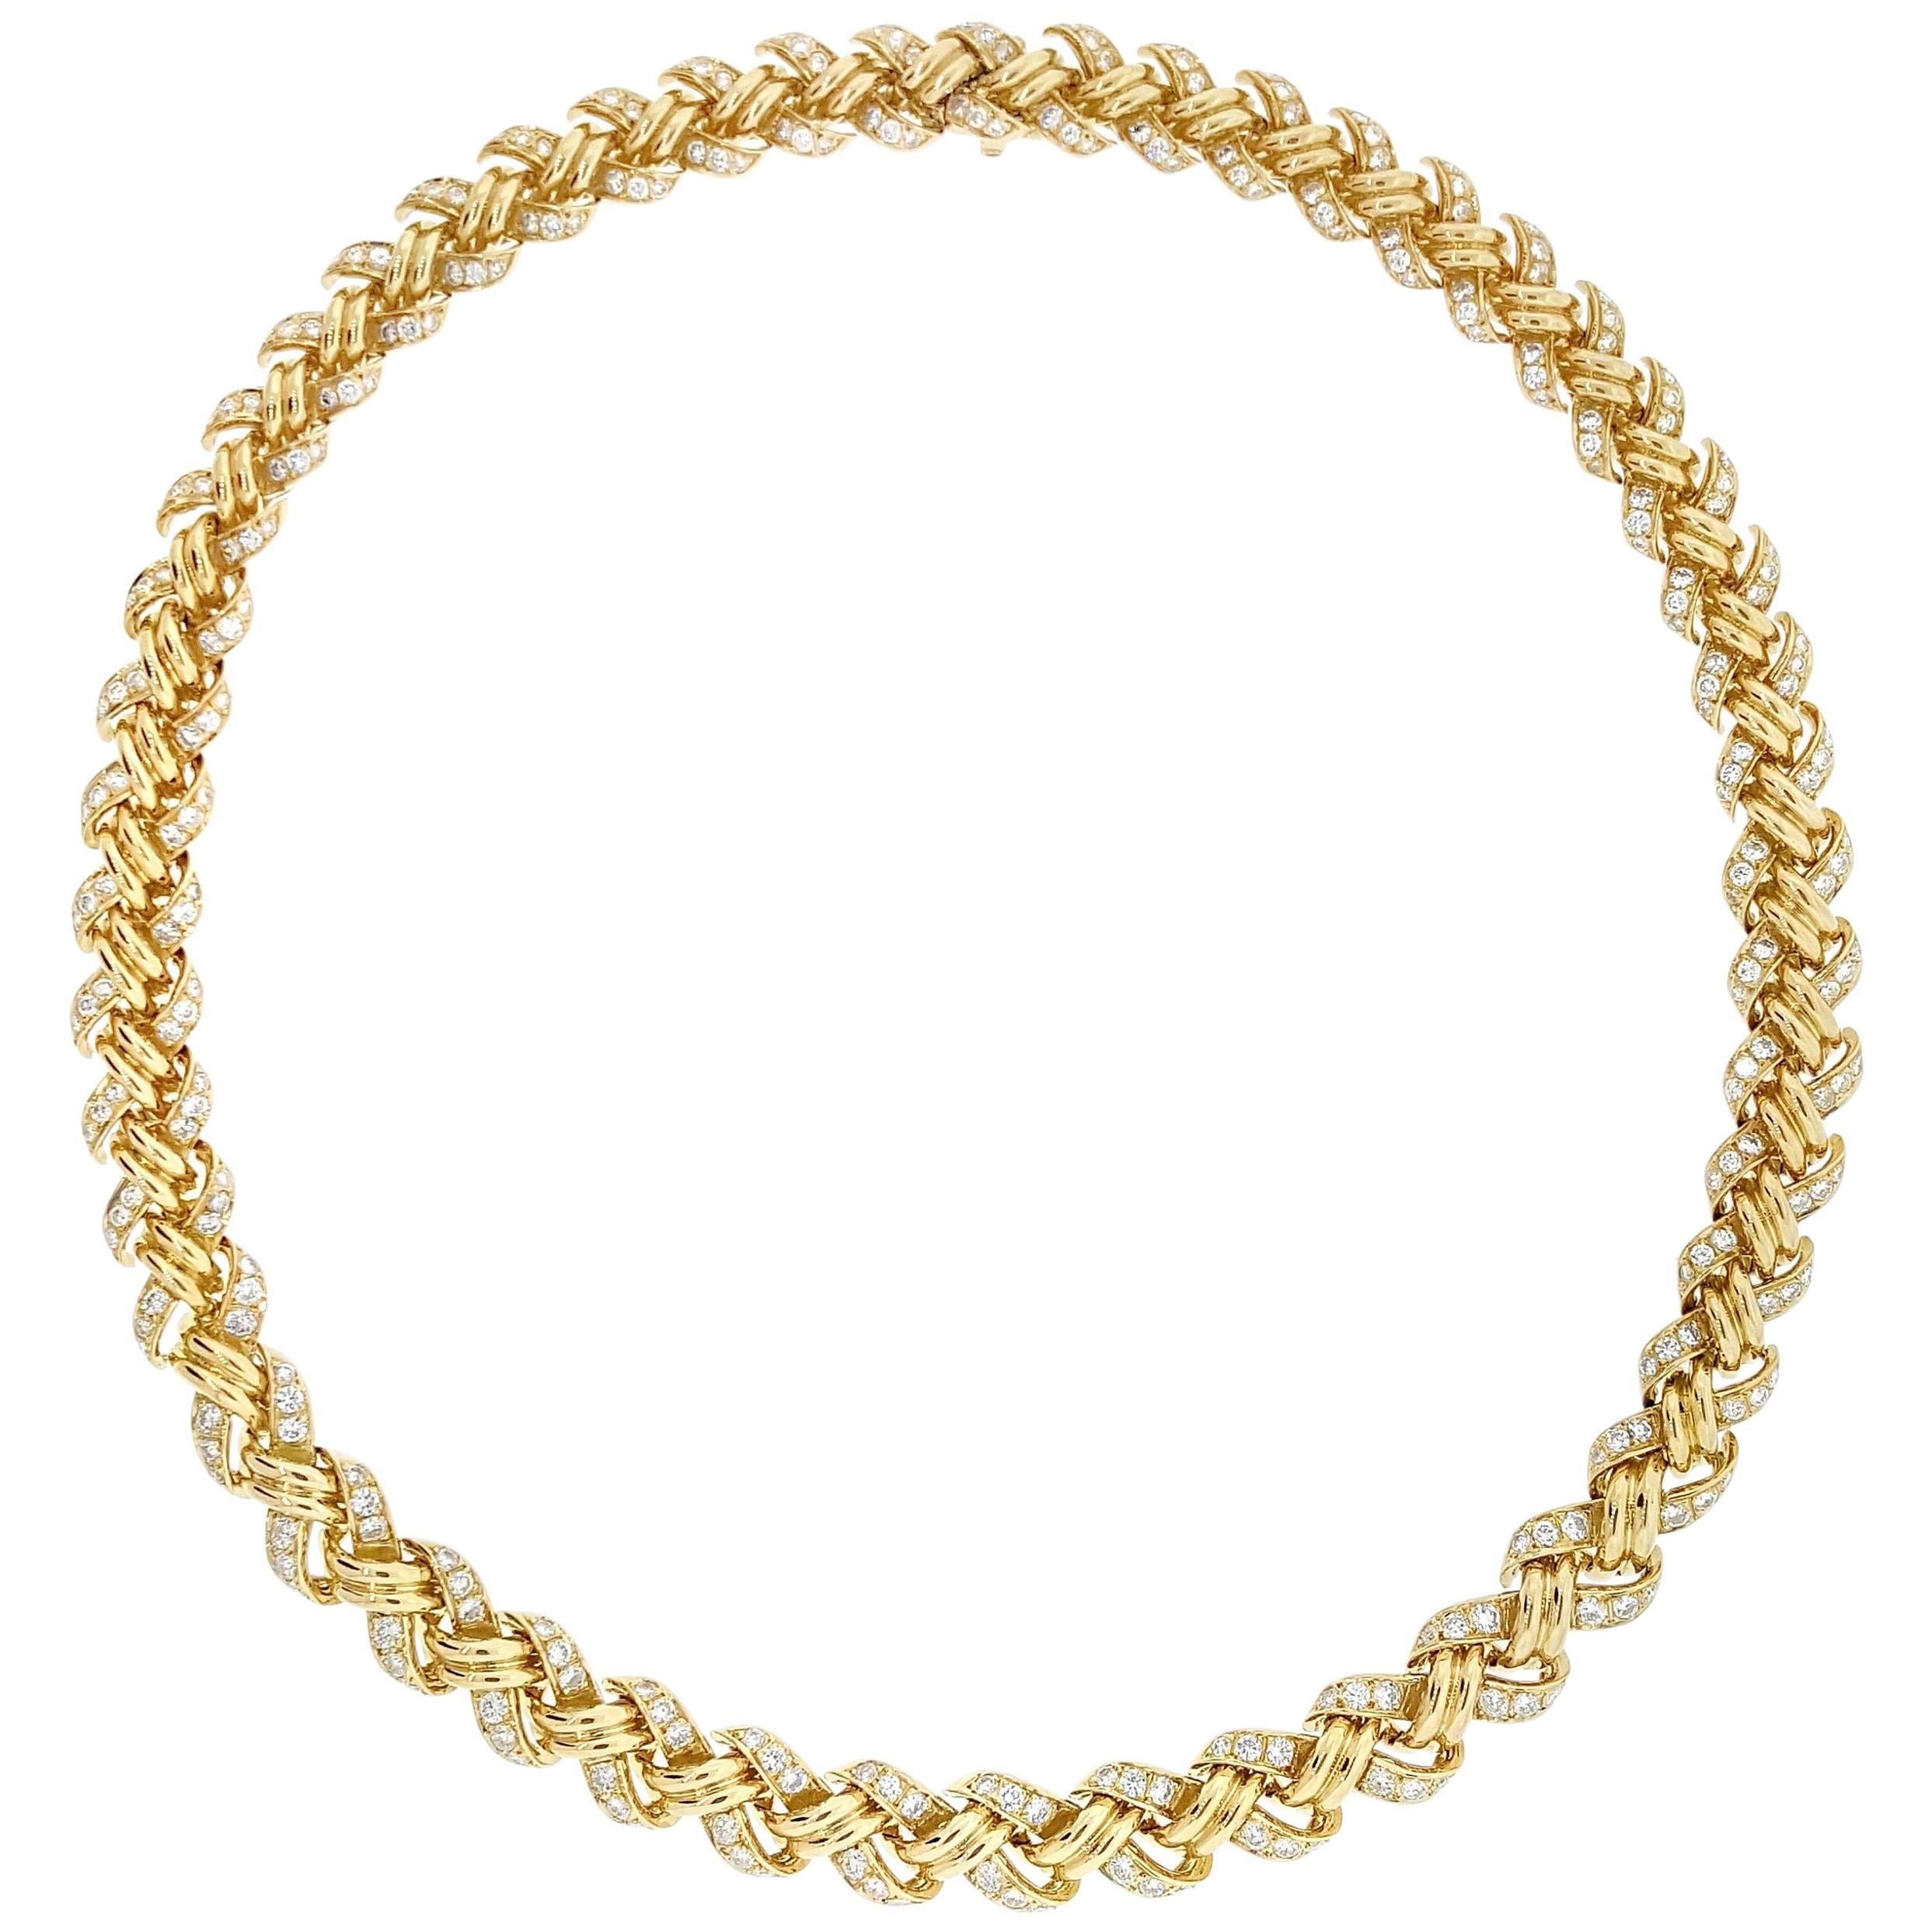 French Diamond Choker Necklace with 10.00 Carats in 18 Karat Yellow Gold